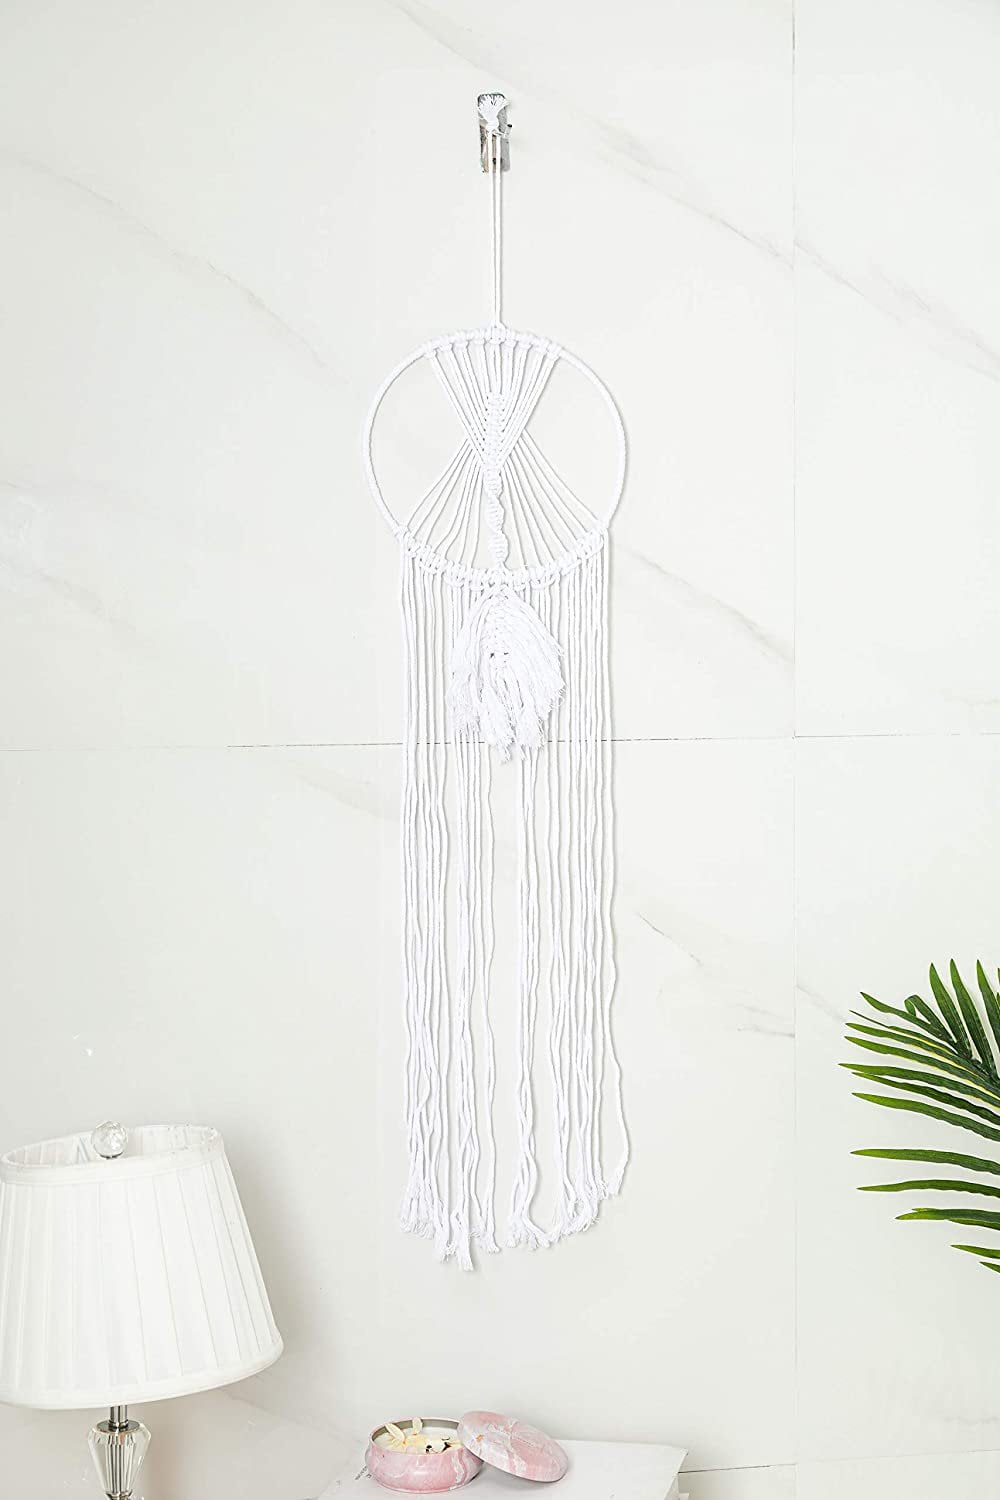 Macrame Dream Catcher Large Wall Hanging Decor Woven Feather Handmade Dreamcatcher Tassels Decoration Bedroom Dorm Nursery Chic Ornament Craft 36 x 13 inches Seupeak Color : Feather Style